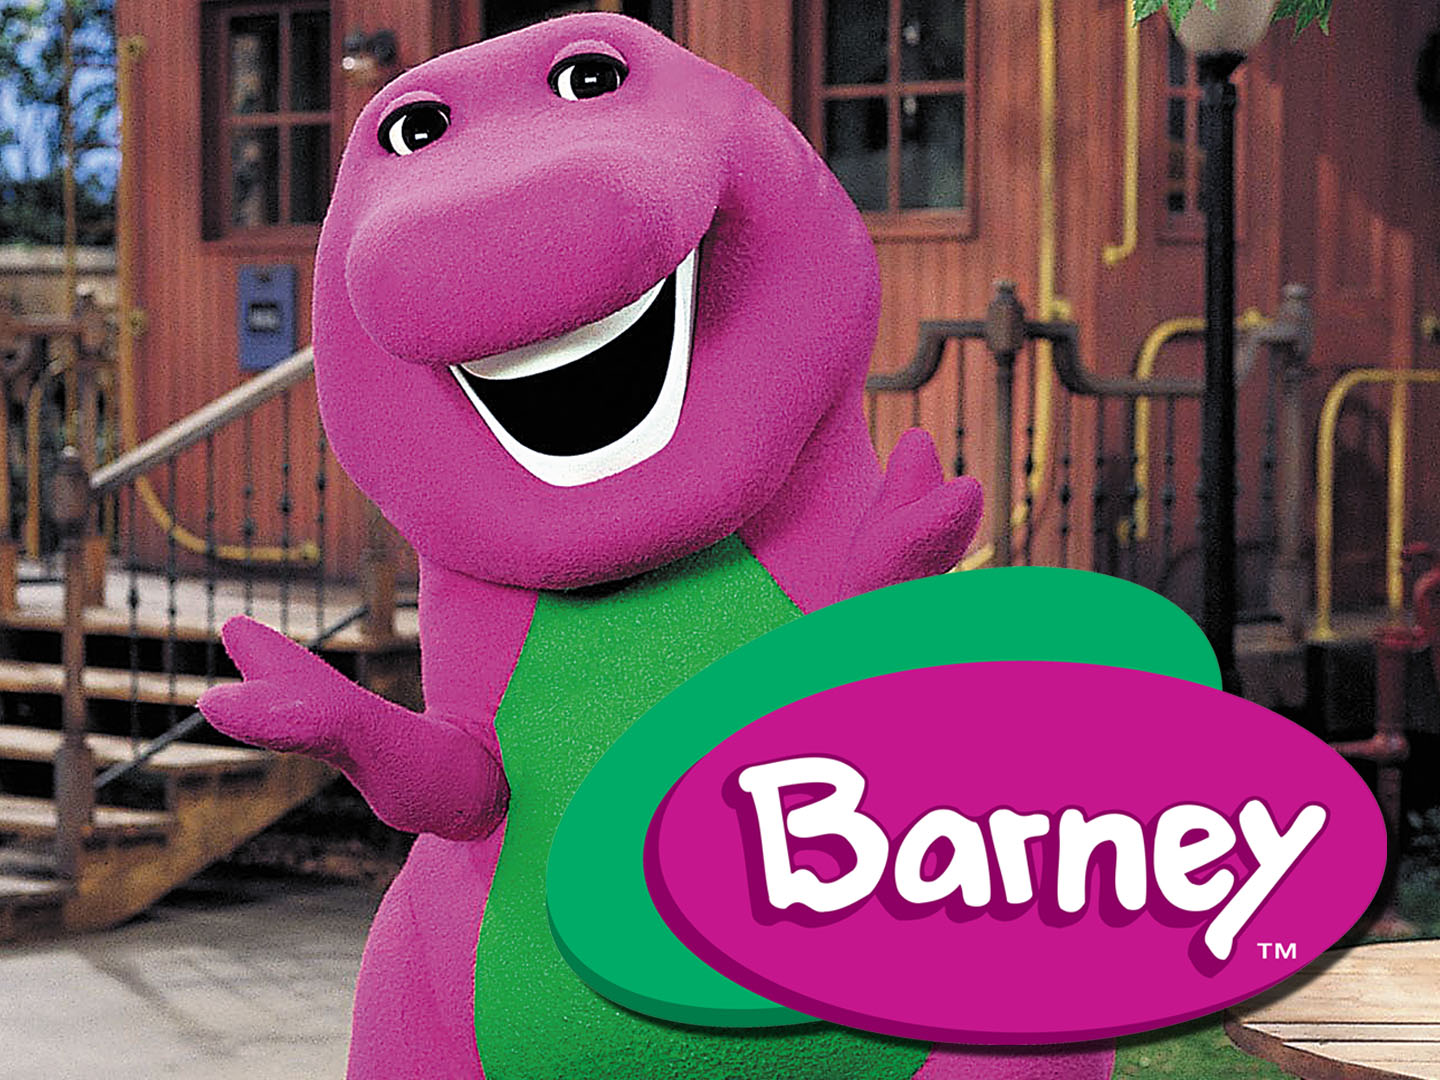 barney and friends 15 wallpapers hd posterjpg